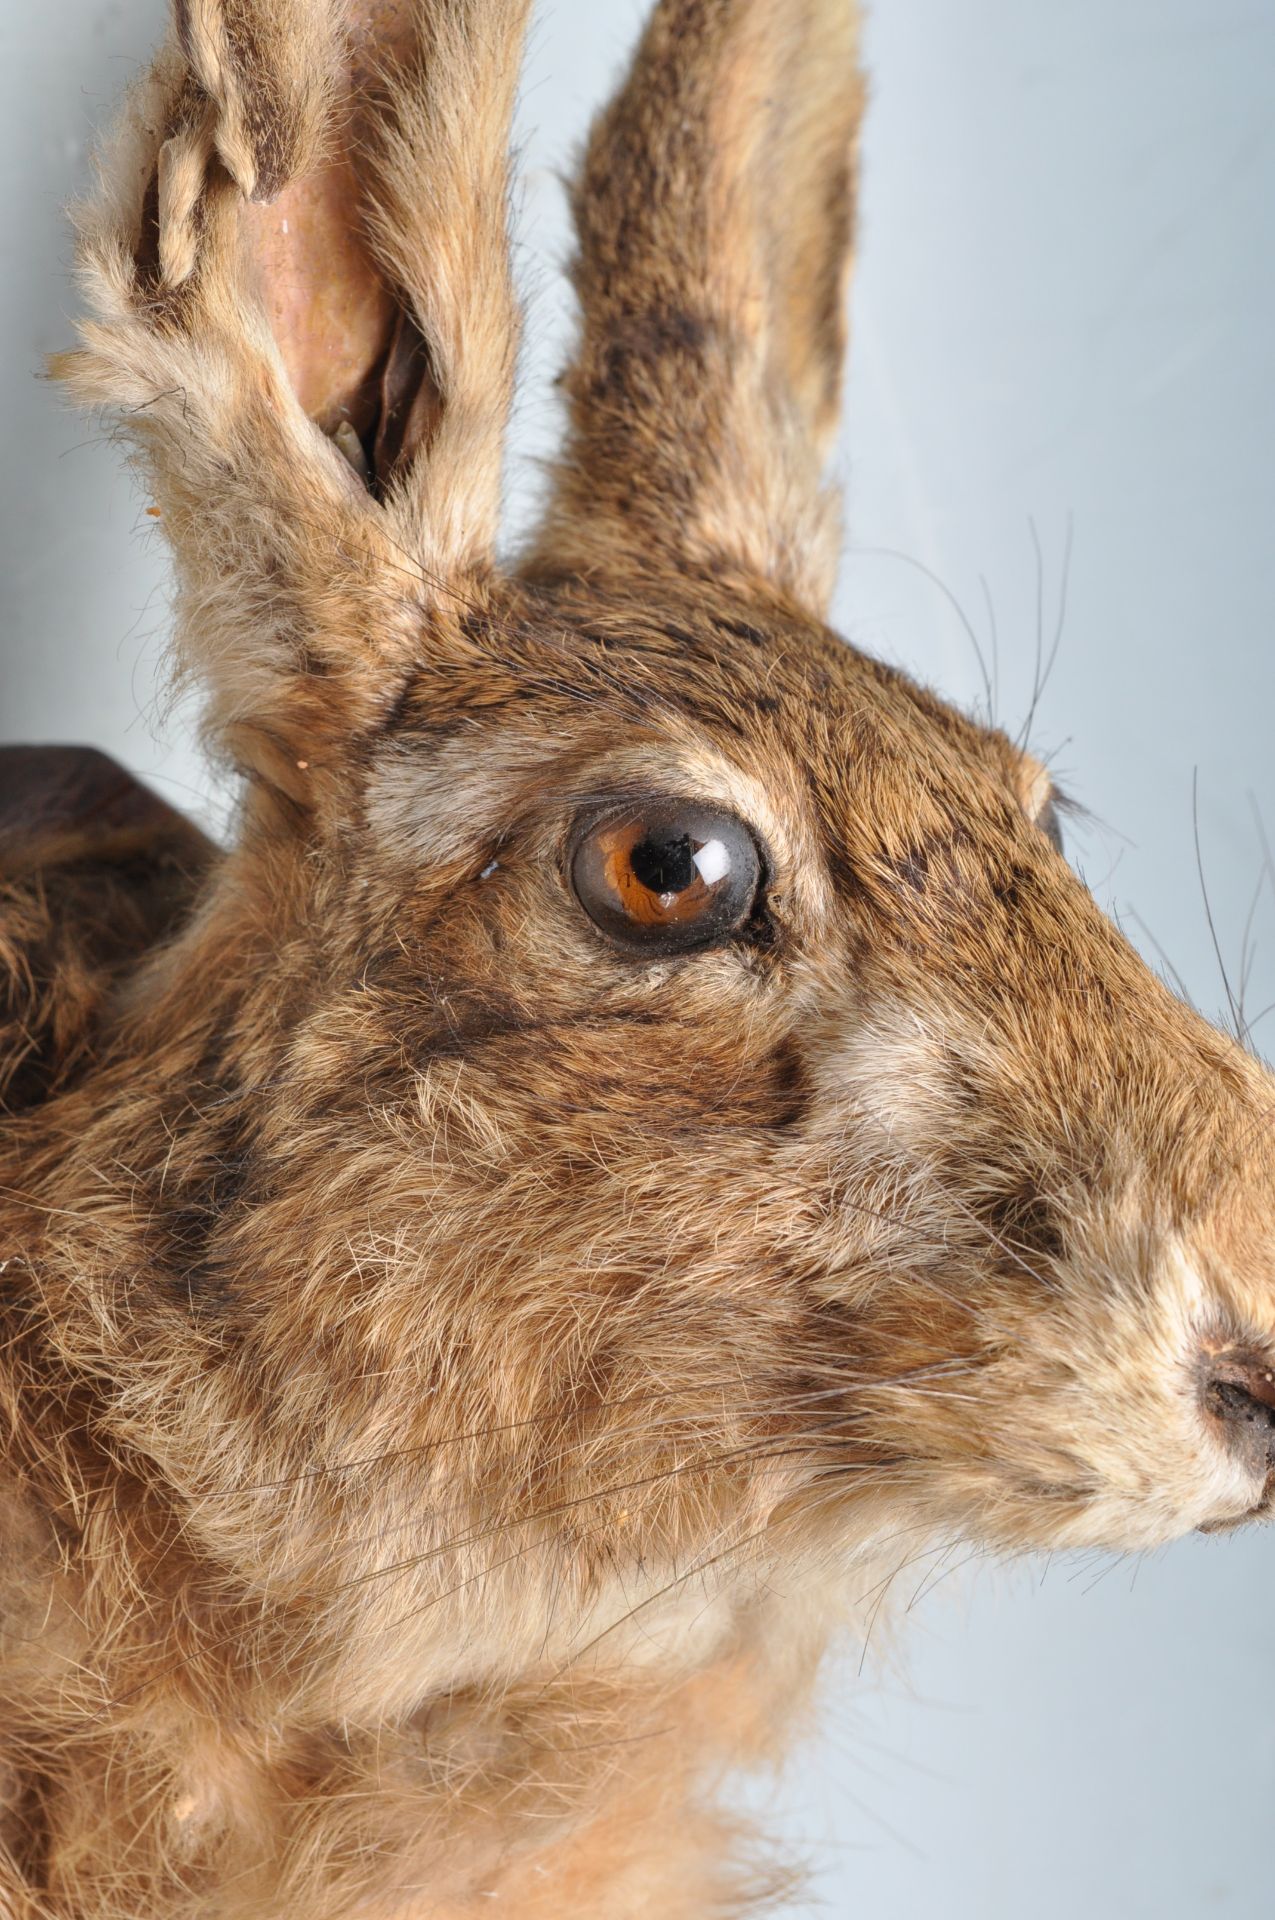 OF TAXIDERMY INTEREST - WALL MOUNTED HARES HEAD - Image 2 of 7